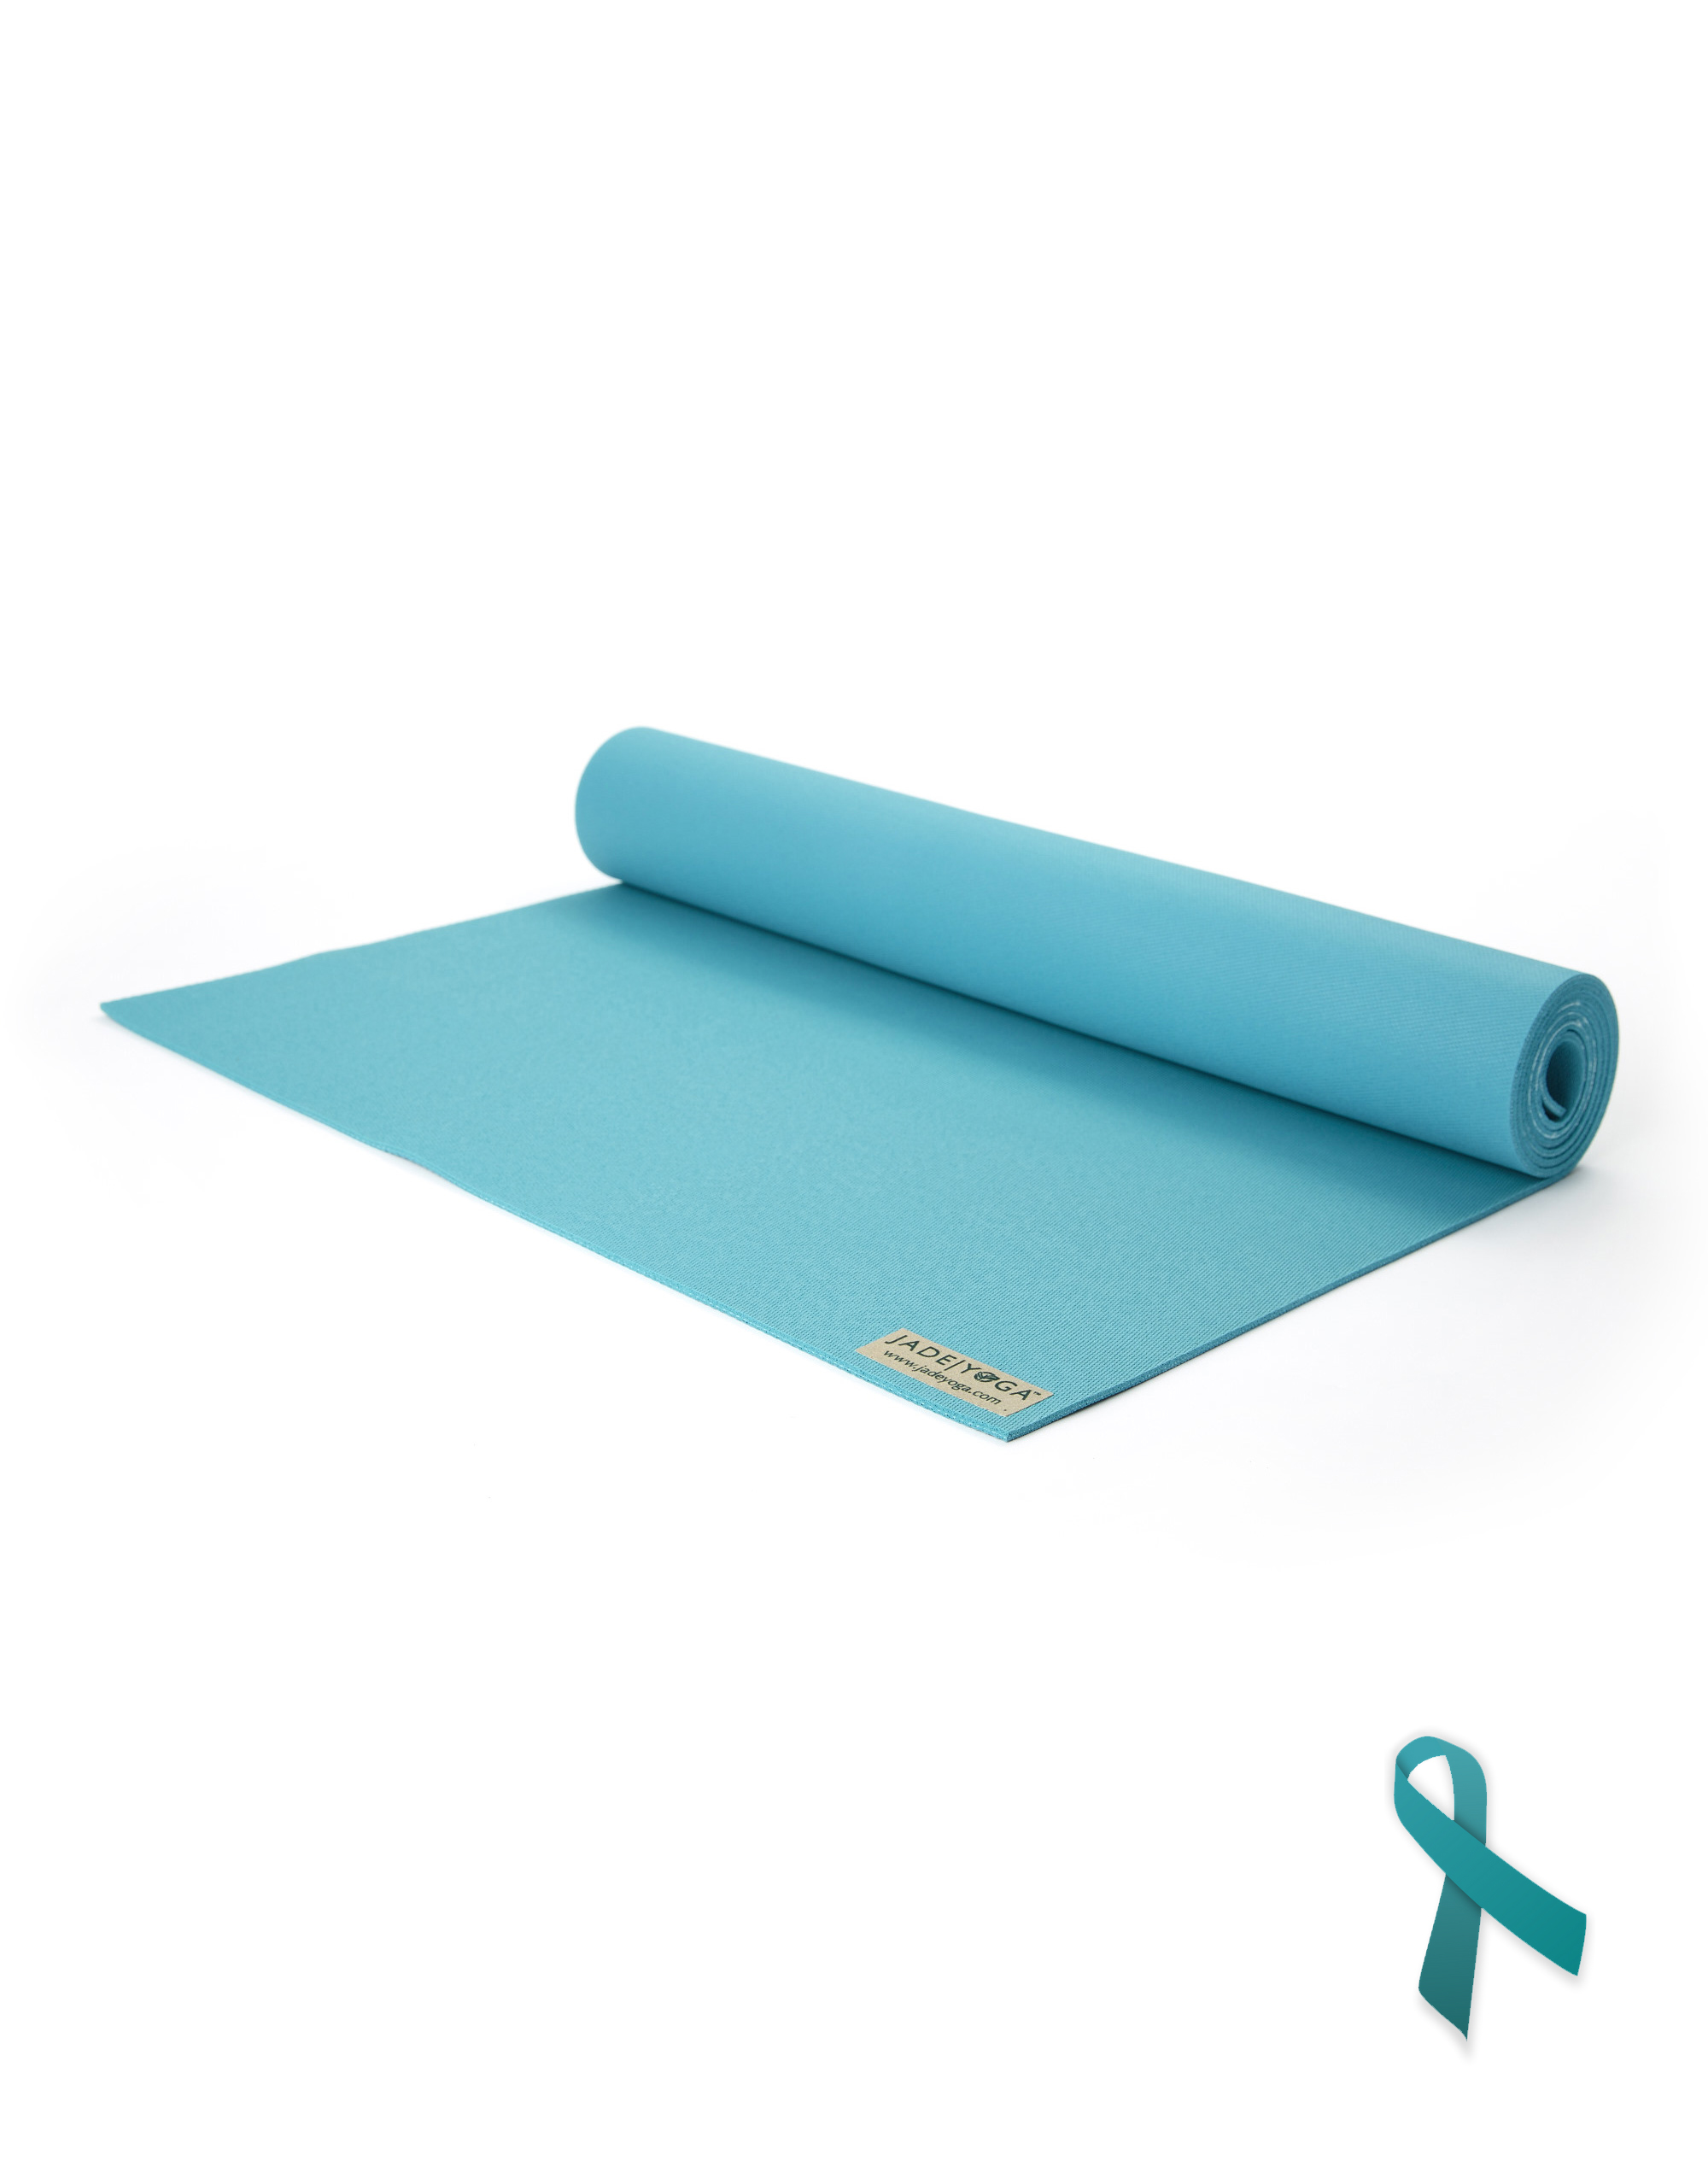 We're really lichen our new limited edition Harmony mat color